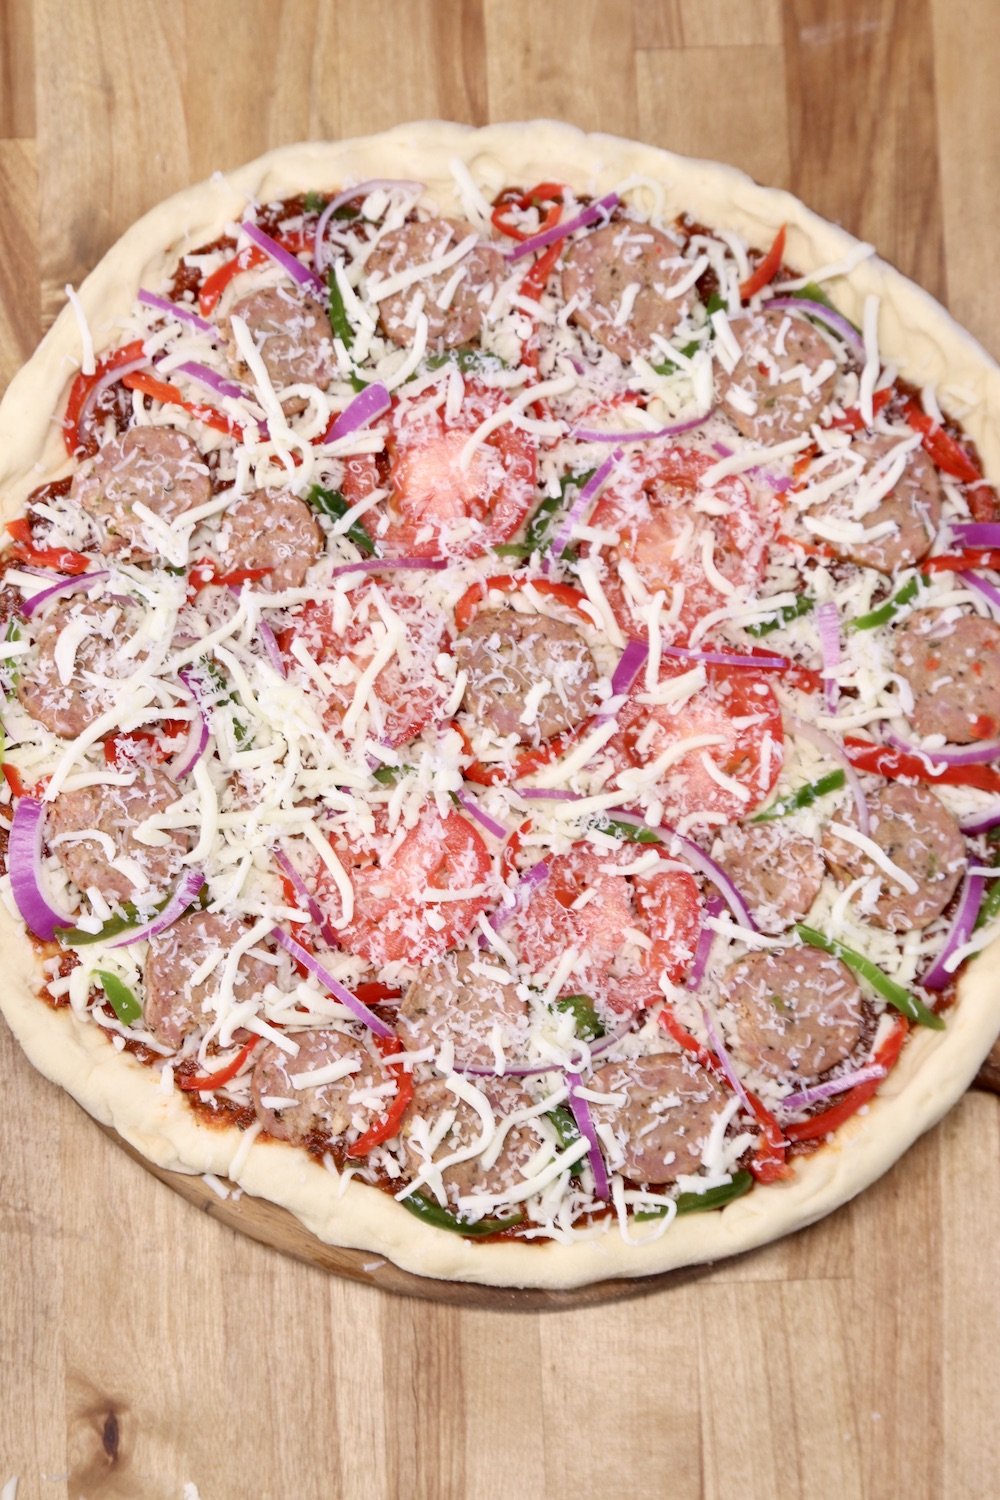 smoked sausage pizza with vegetables - not baked